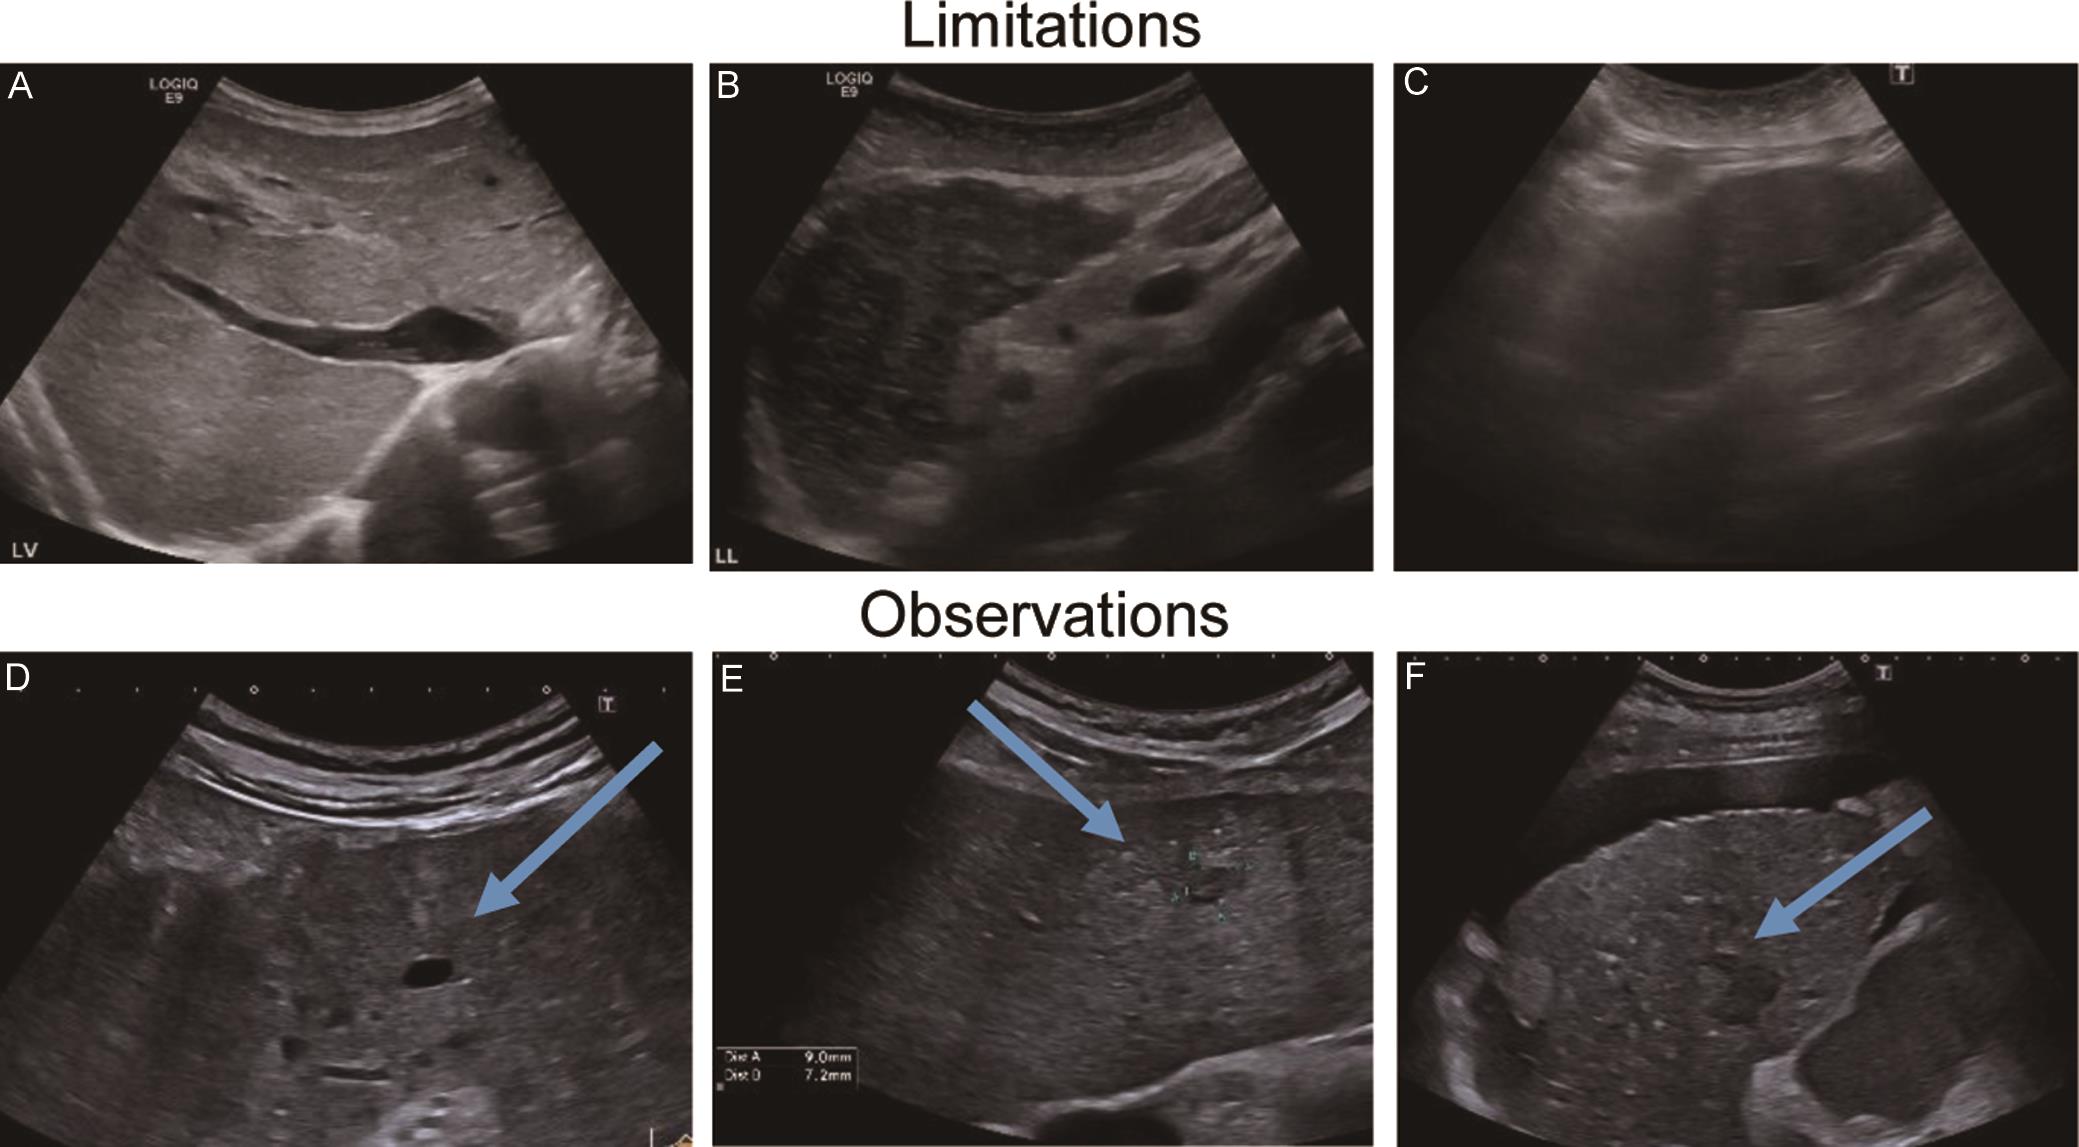 Scoring of visual limitations (upper panel, A–C) and observations (lower panel, D–F) in ultrasound, adapted by Fetzer <italic>et al</italic>.